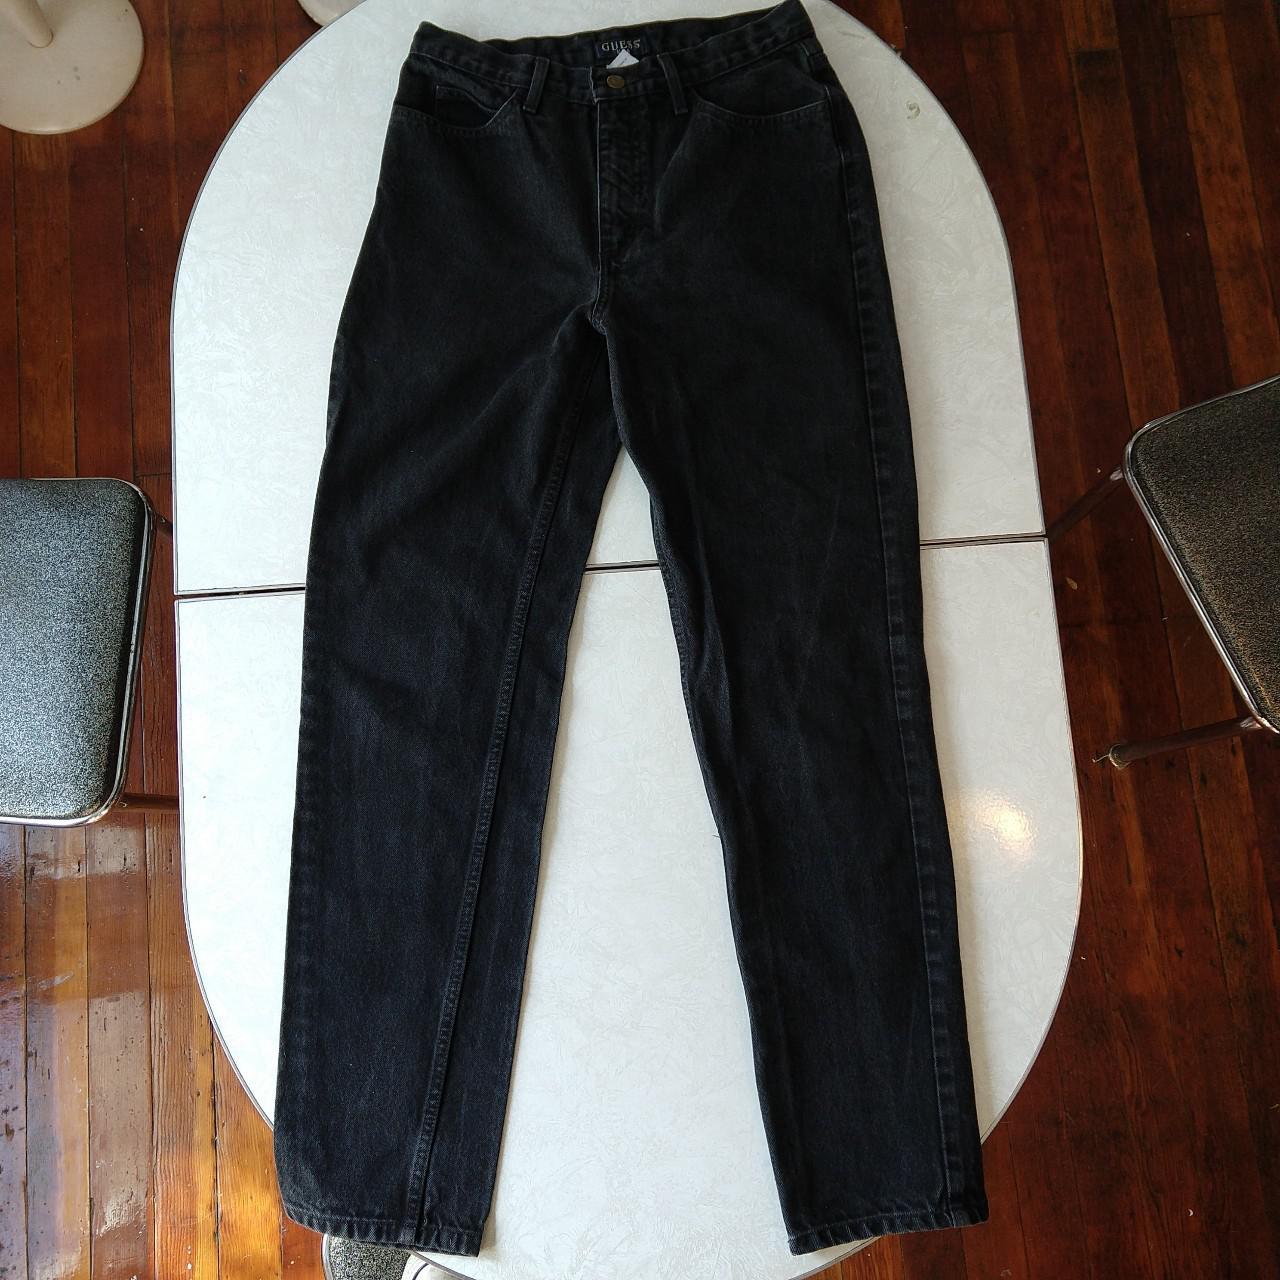 Product Image 3 - Vintage Guess jeans. Featuring the